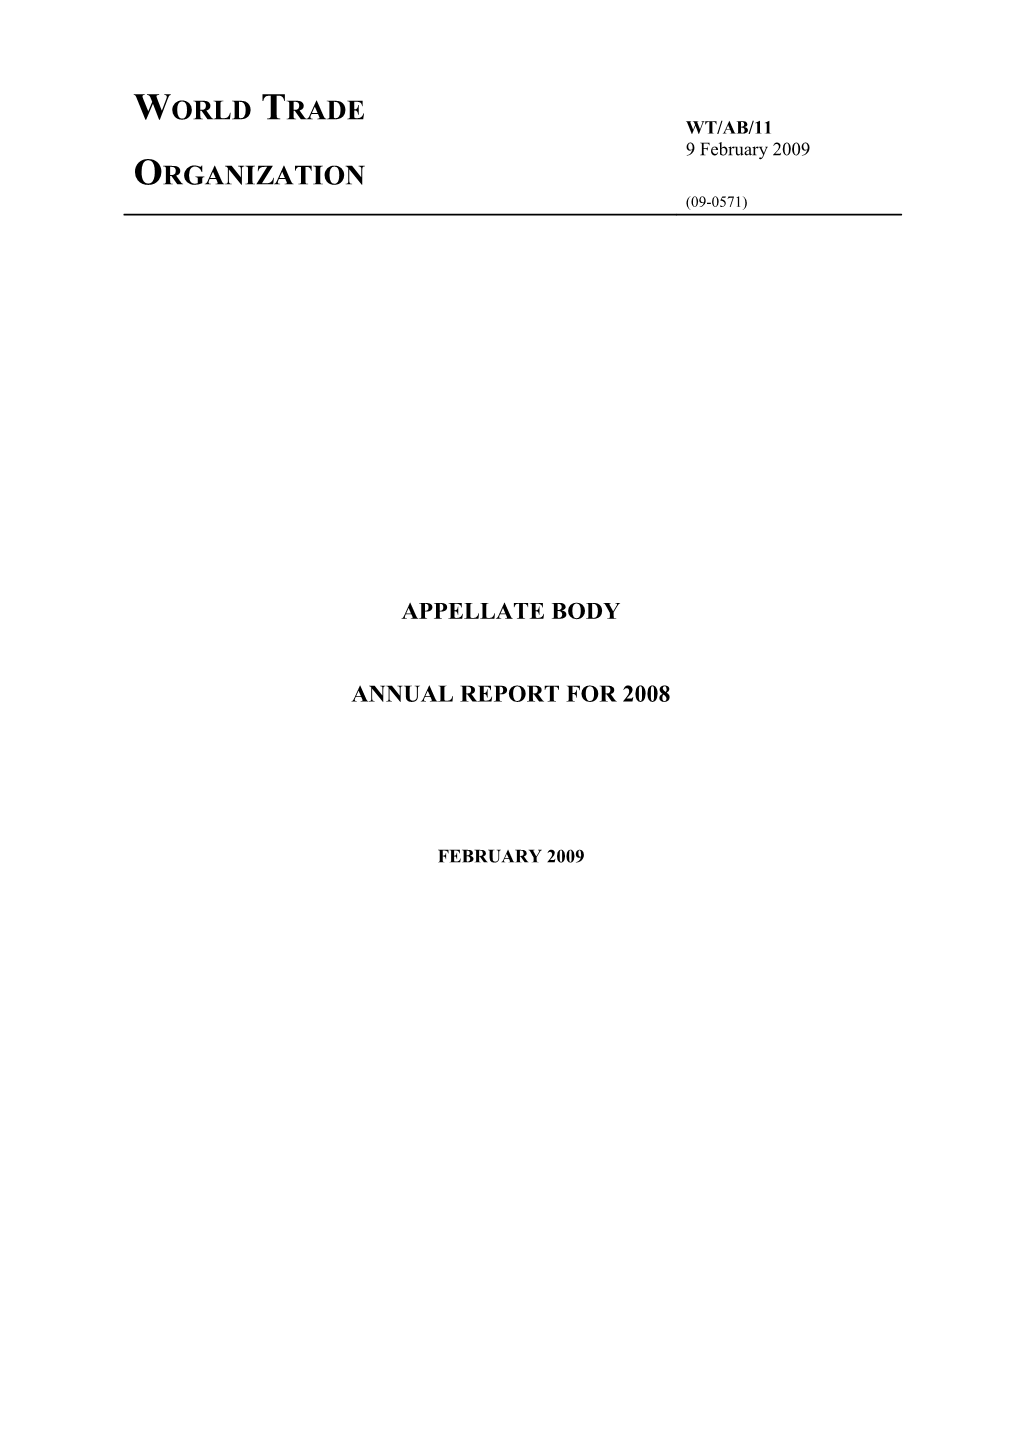 Annual Report for 2008